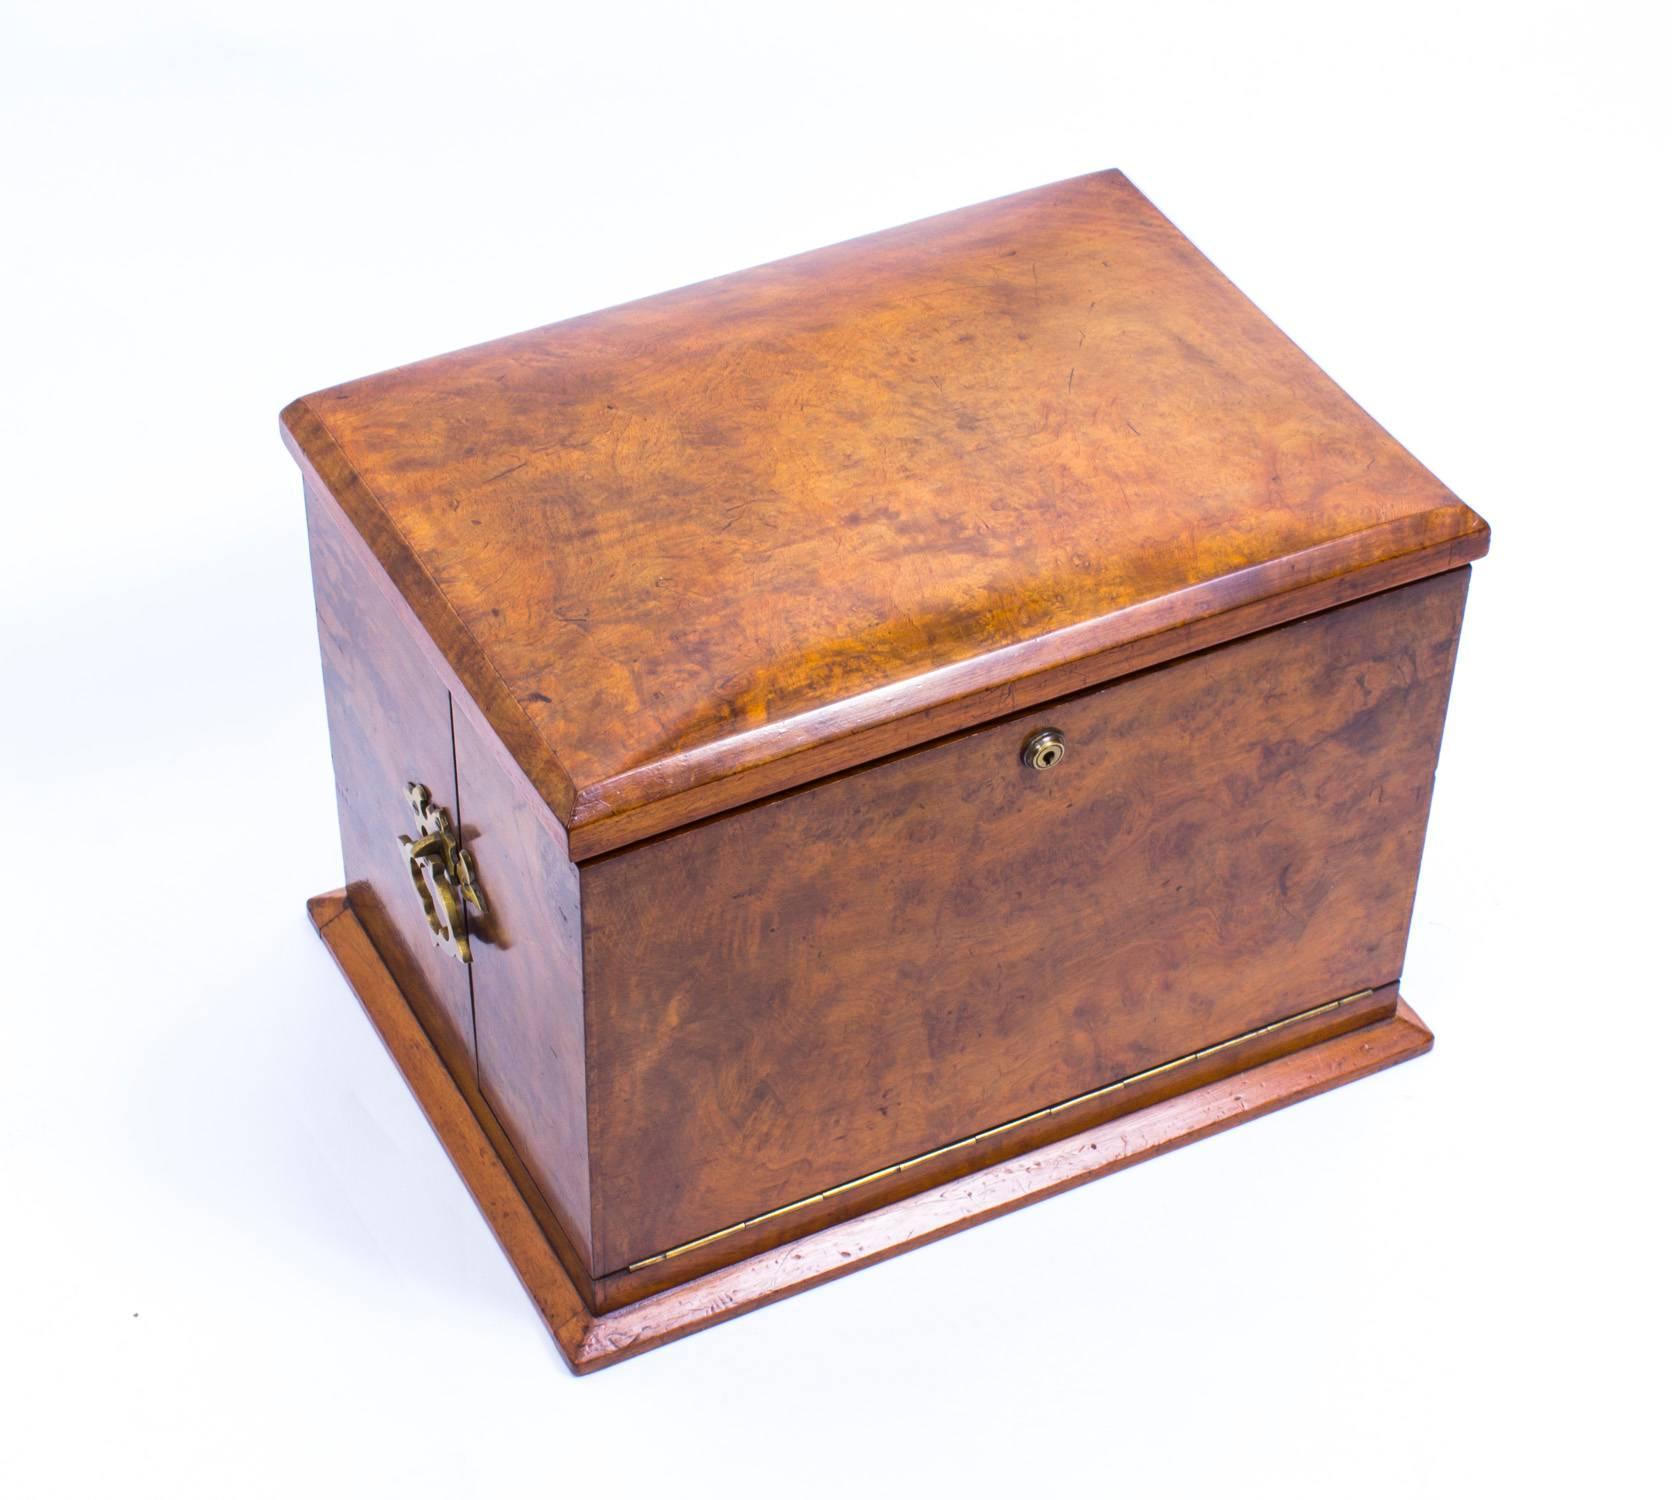 This is a magnificent antique Victorian burr walnut writing slope and stationery box compendium, circa 1860 in date.

The top lifts up to reveal a tiered series of compartments for writing paper, envelopes and other stationery items, while the